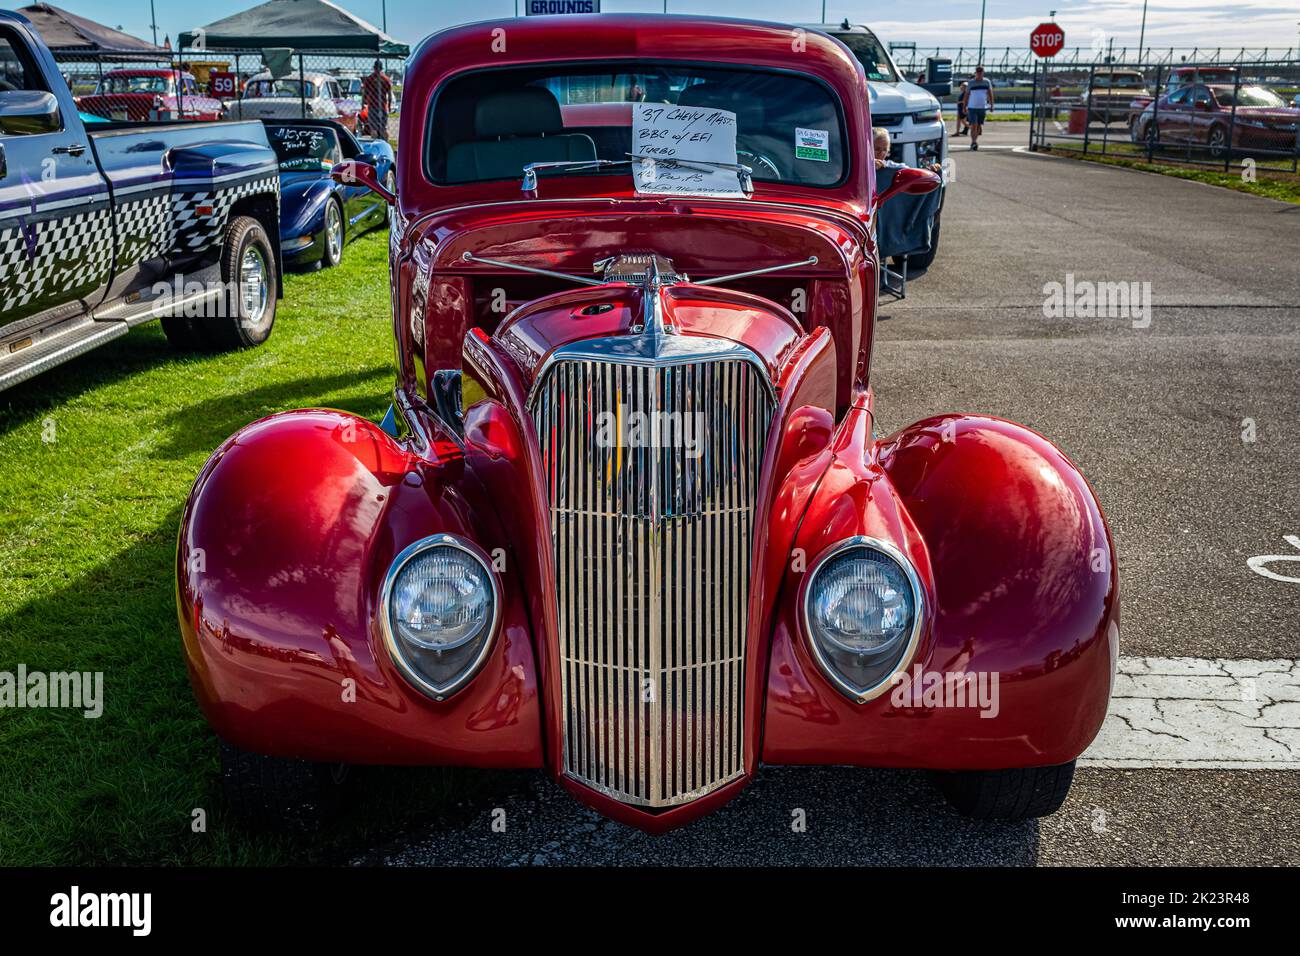 Daytona Beach, FL - November 28, 2020: High perspective front view of a 1937 Chevrolet Master Coupe at a local car show. Stock Photo